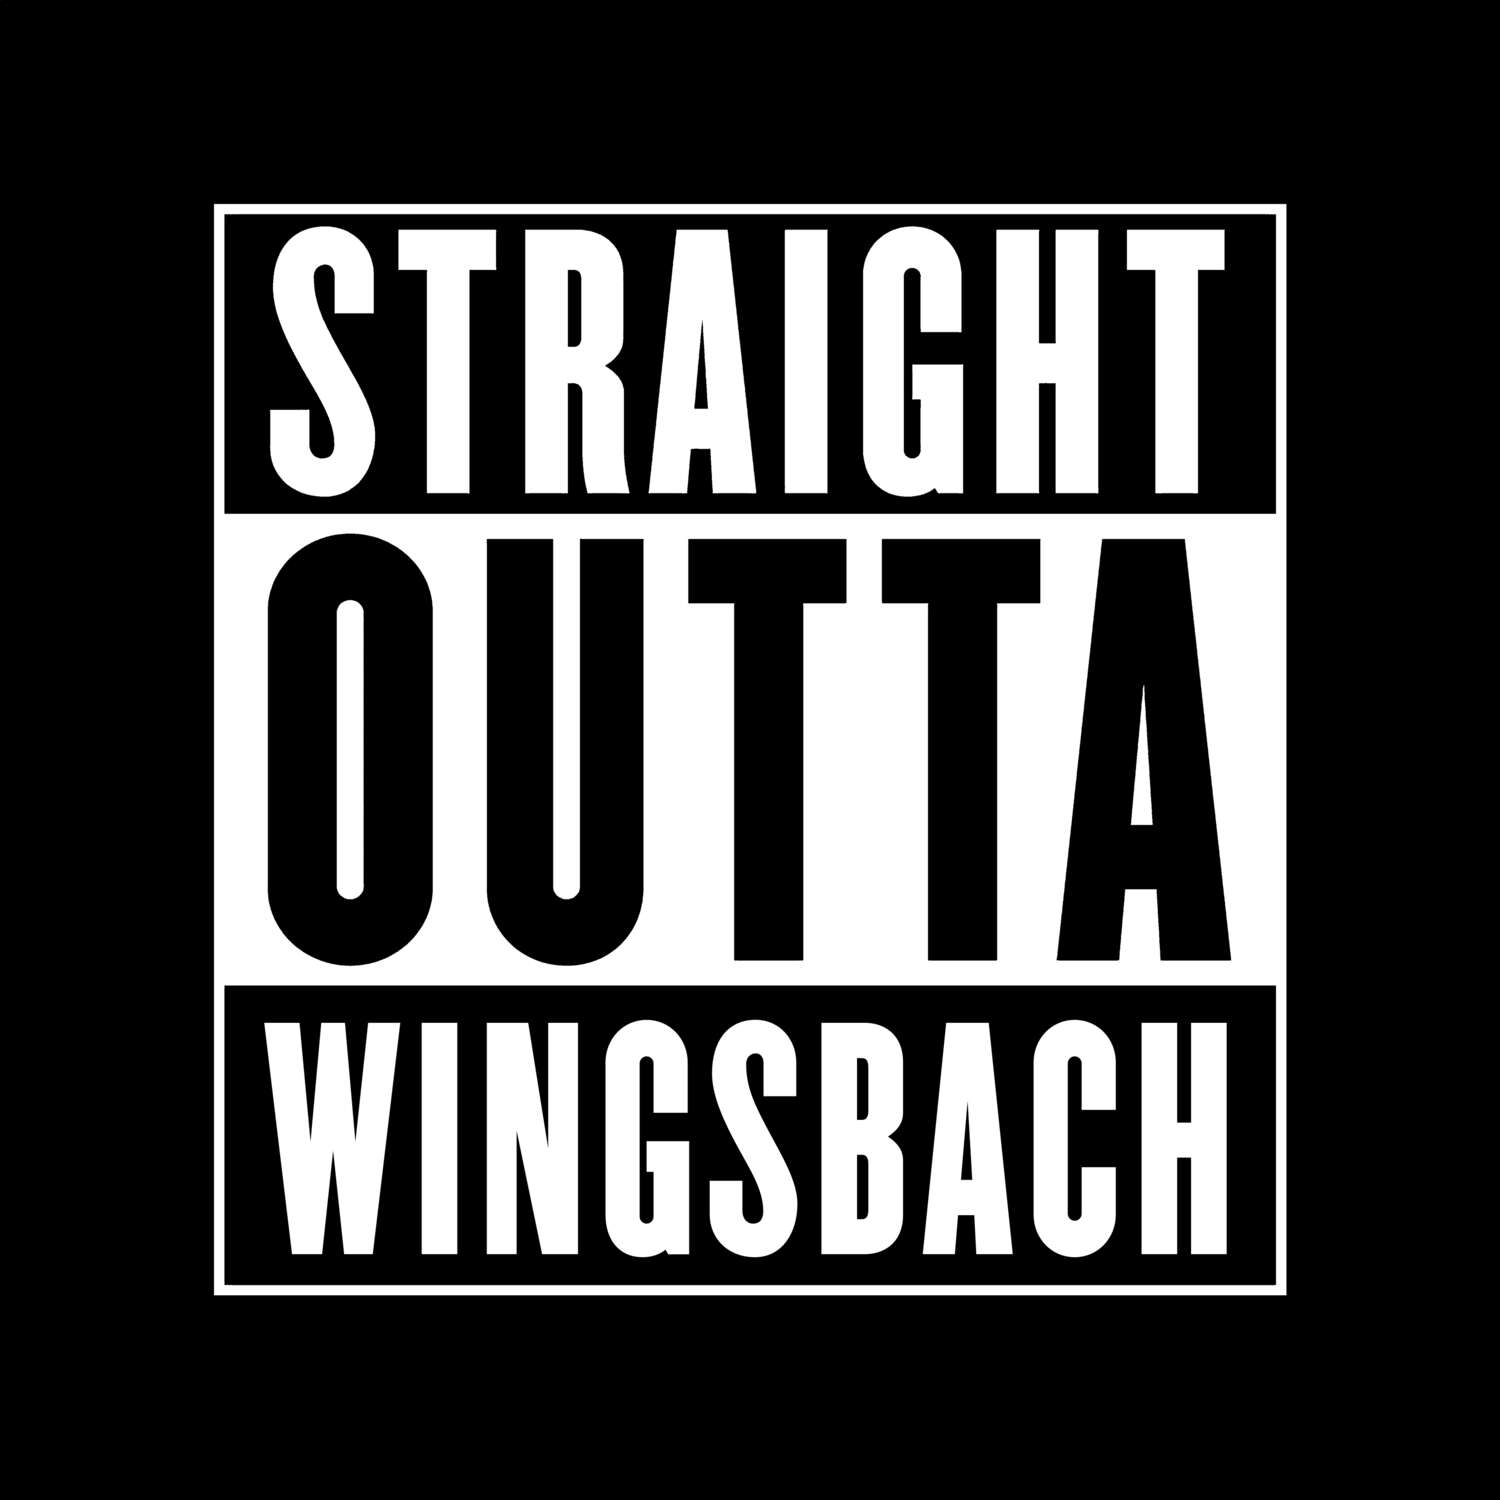 Wingsbach T-Shirt »Straight Outta«